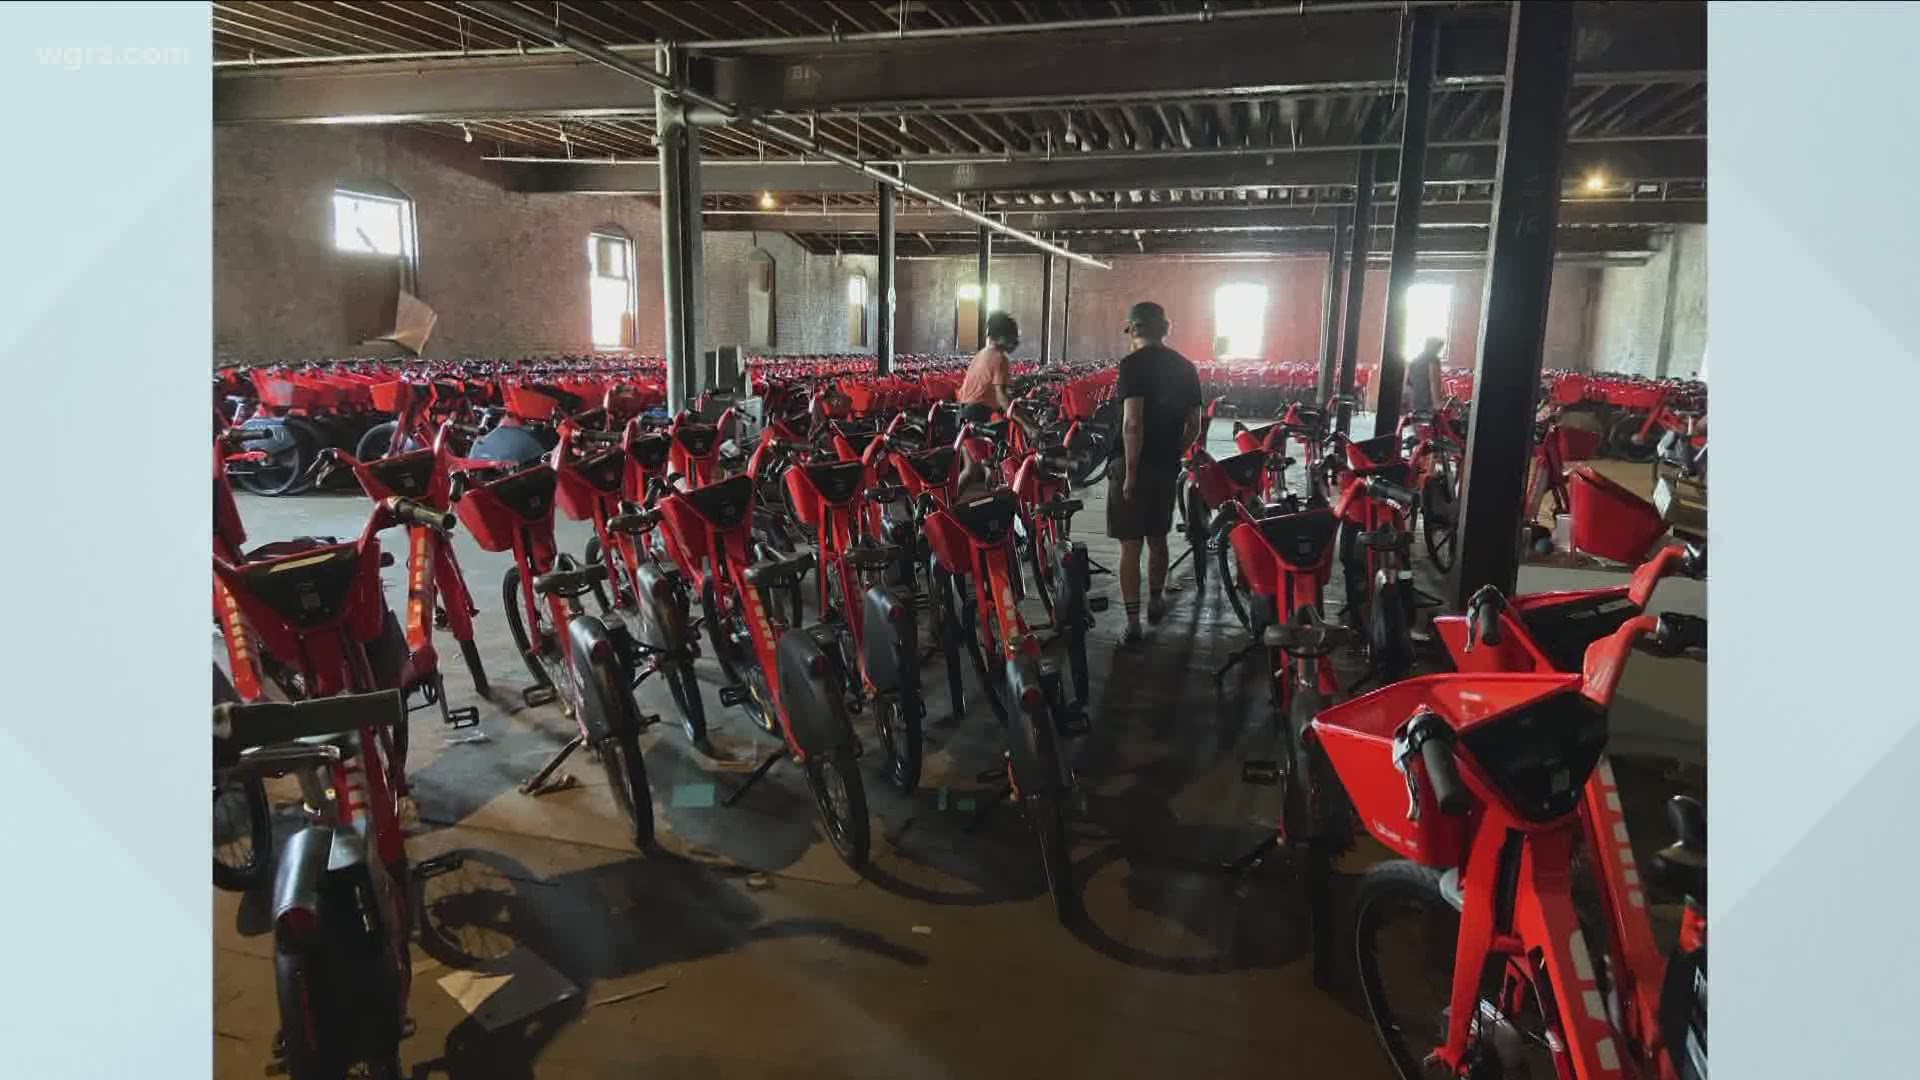 Buffalo-based organization Shared Mobility recently secured a donation of thousands of e-bikes once owned by Uber